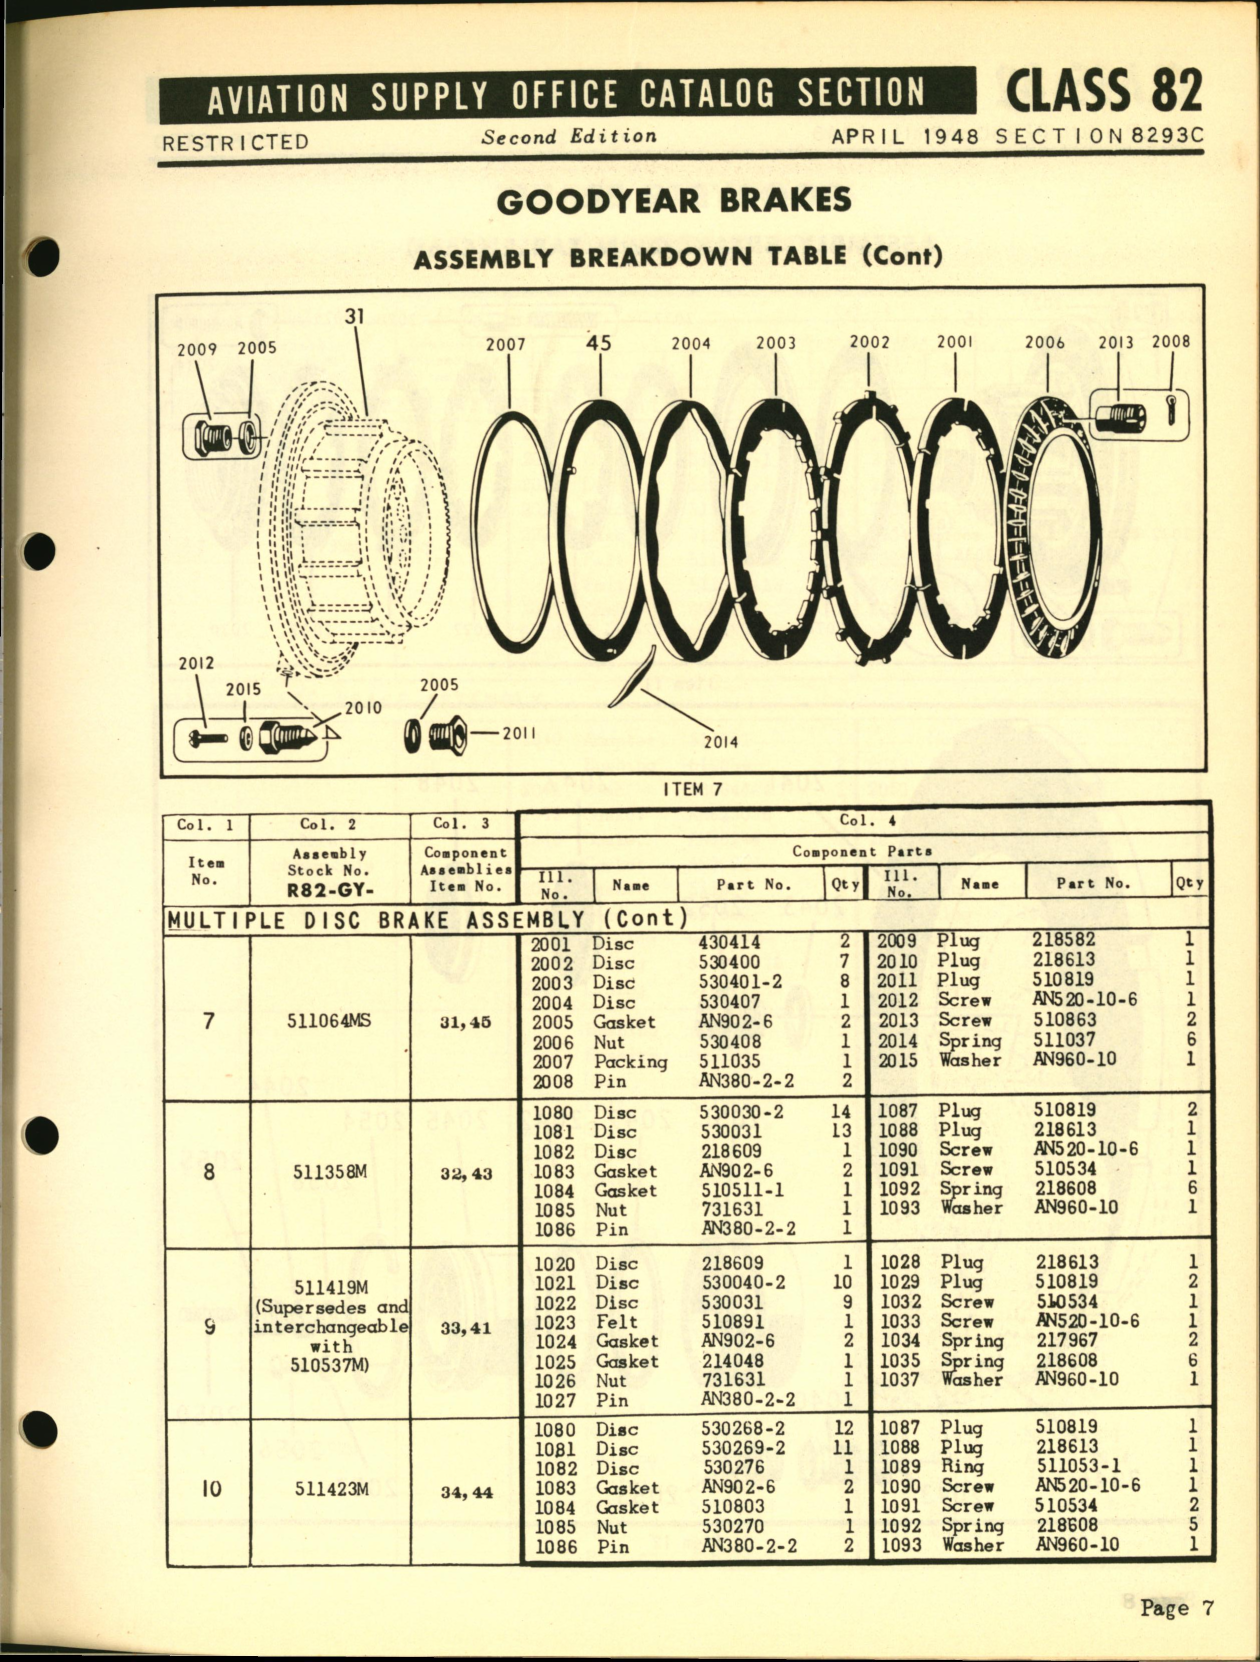 Sample page 7 from AirCorps Library document: Goodyear Brakes